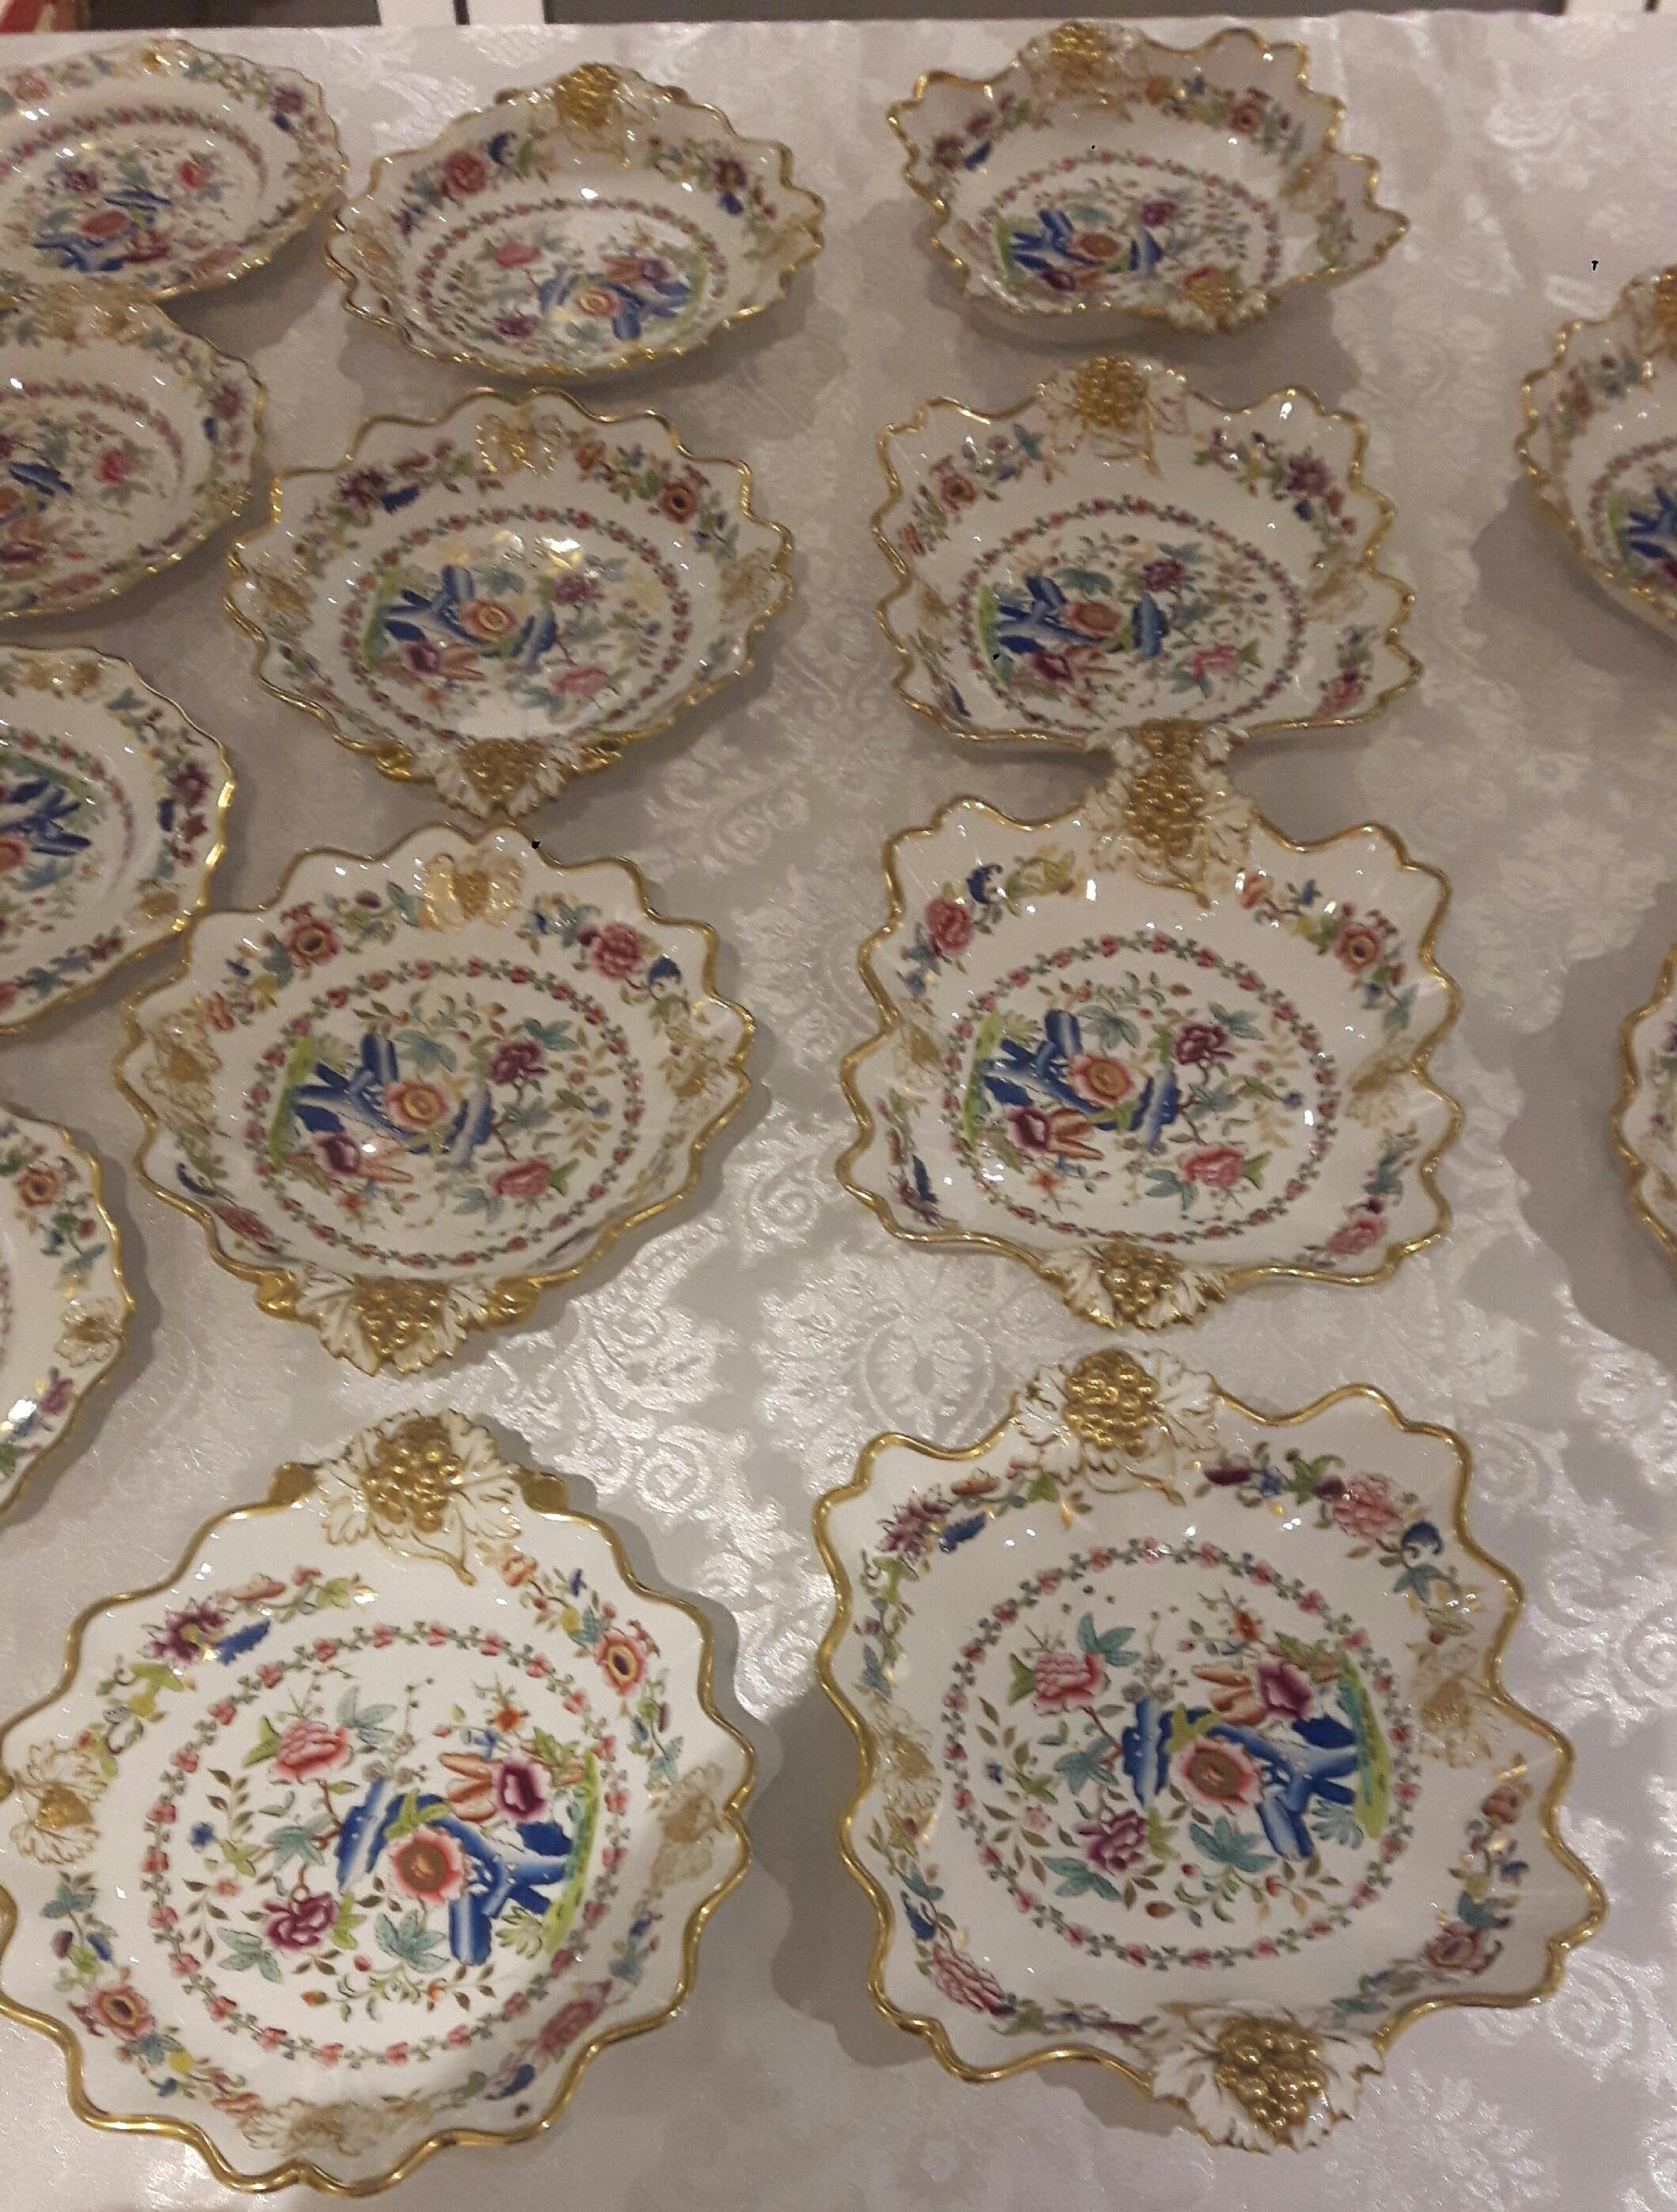 Other Large 19th Century English Dessert Service For Sale